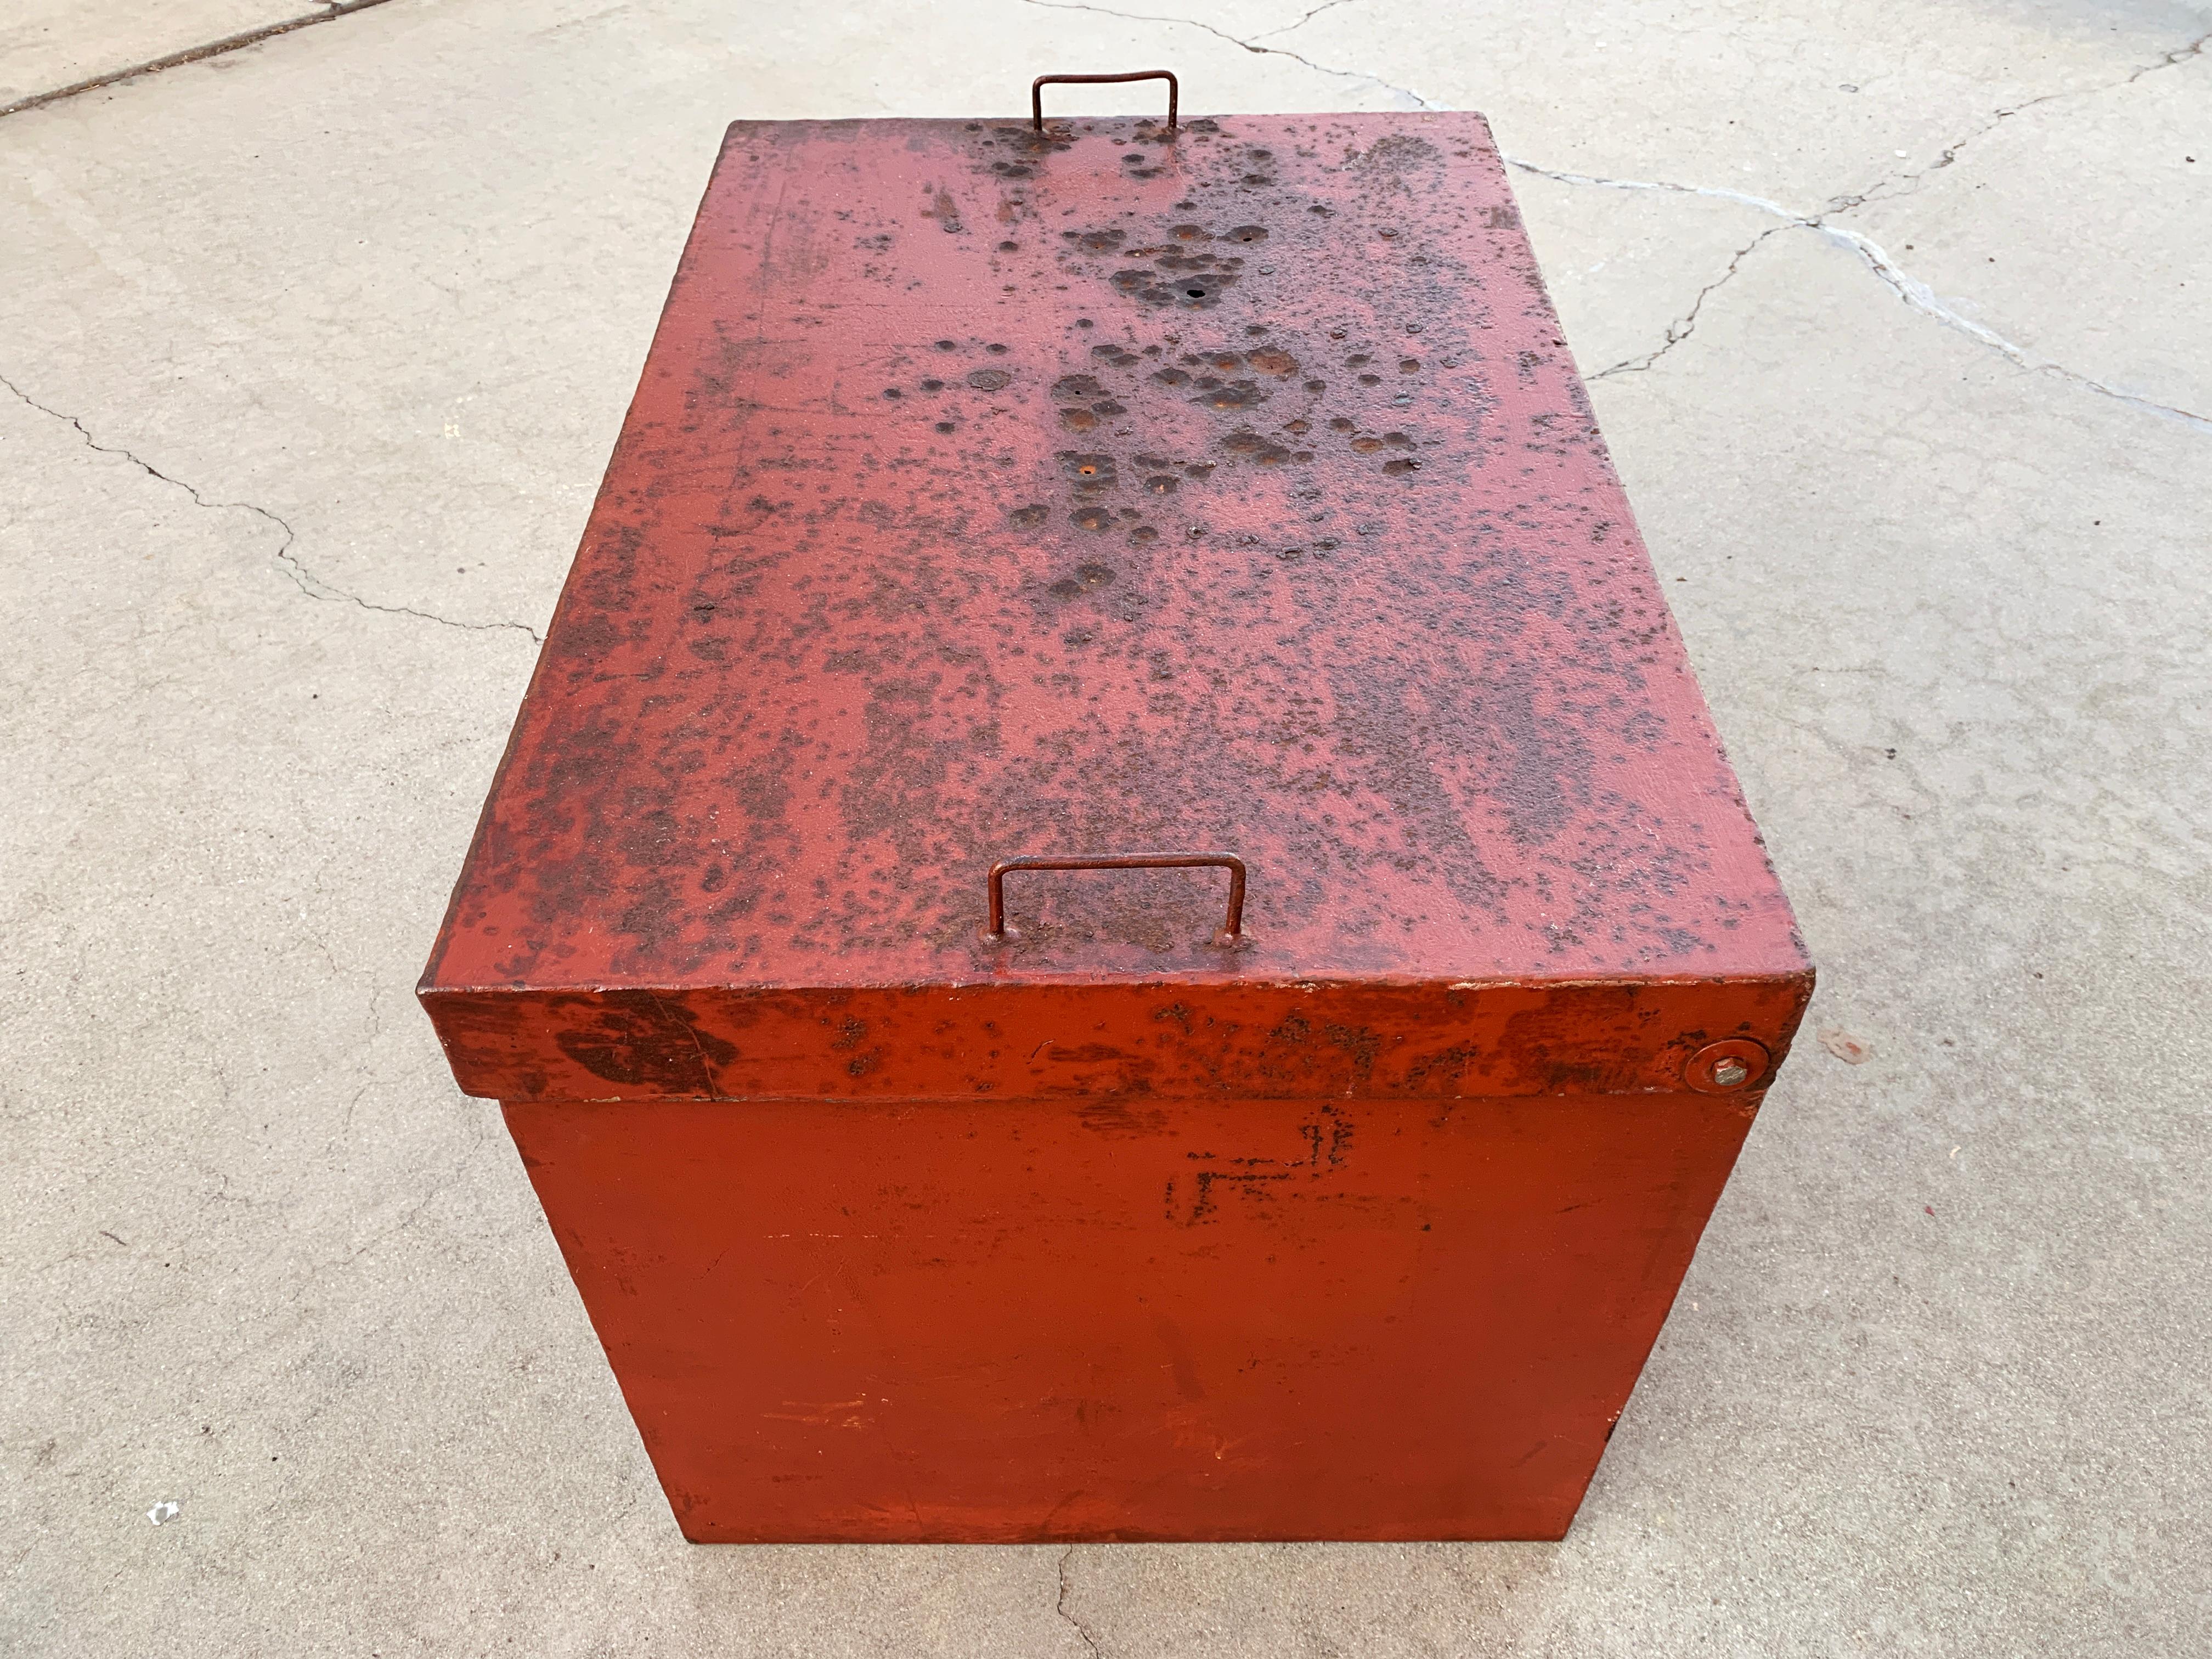 Heavy-duty metal storage box, full of character. It's old, probably dates back to the 1950s. Handmade with distressed red paint and rust patina, this well-made (and very heavy) Industrial piece is truly one-of-a-kind. Complete with an expanded metal